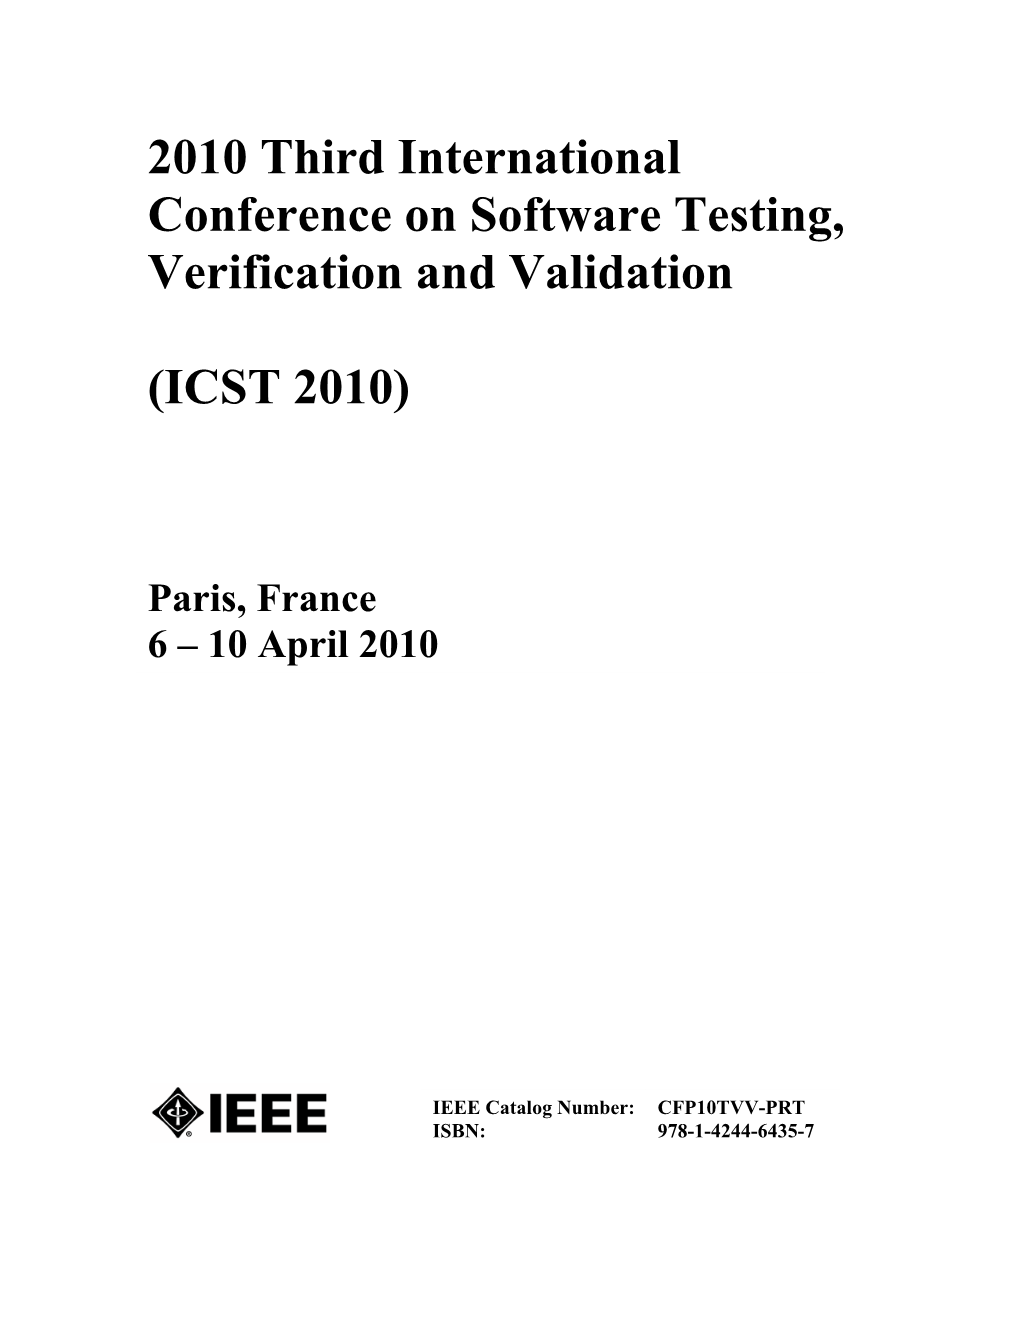 Using Formal Methods and Testability Concepts in the Avionics Systems Validation and Verification (V&V) Process